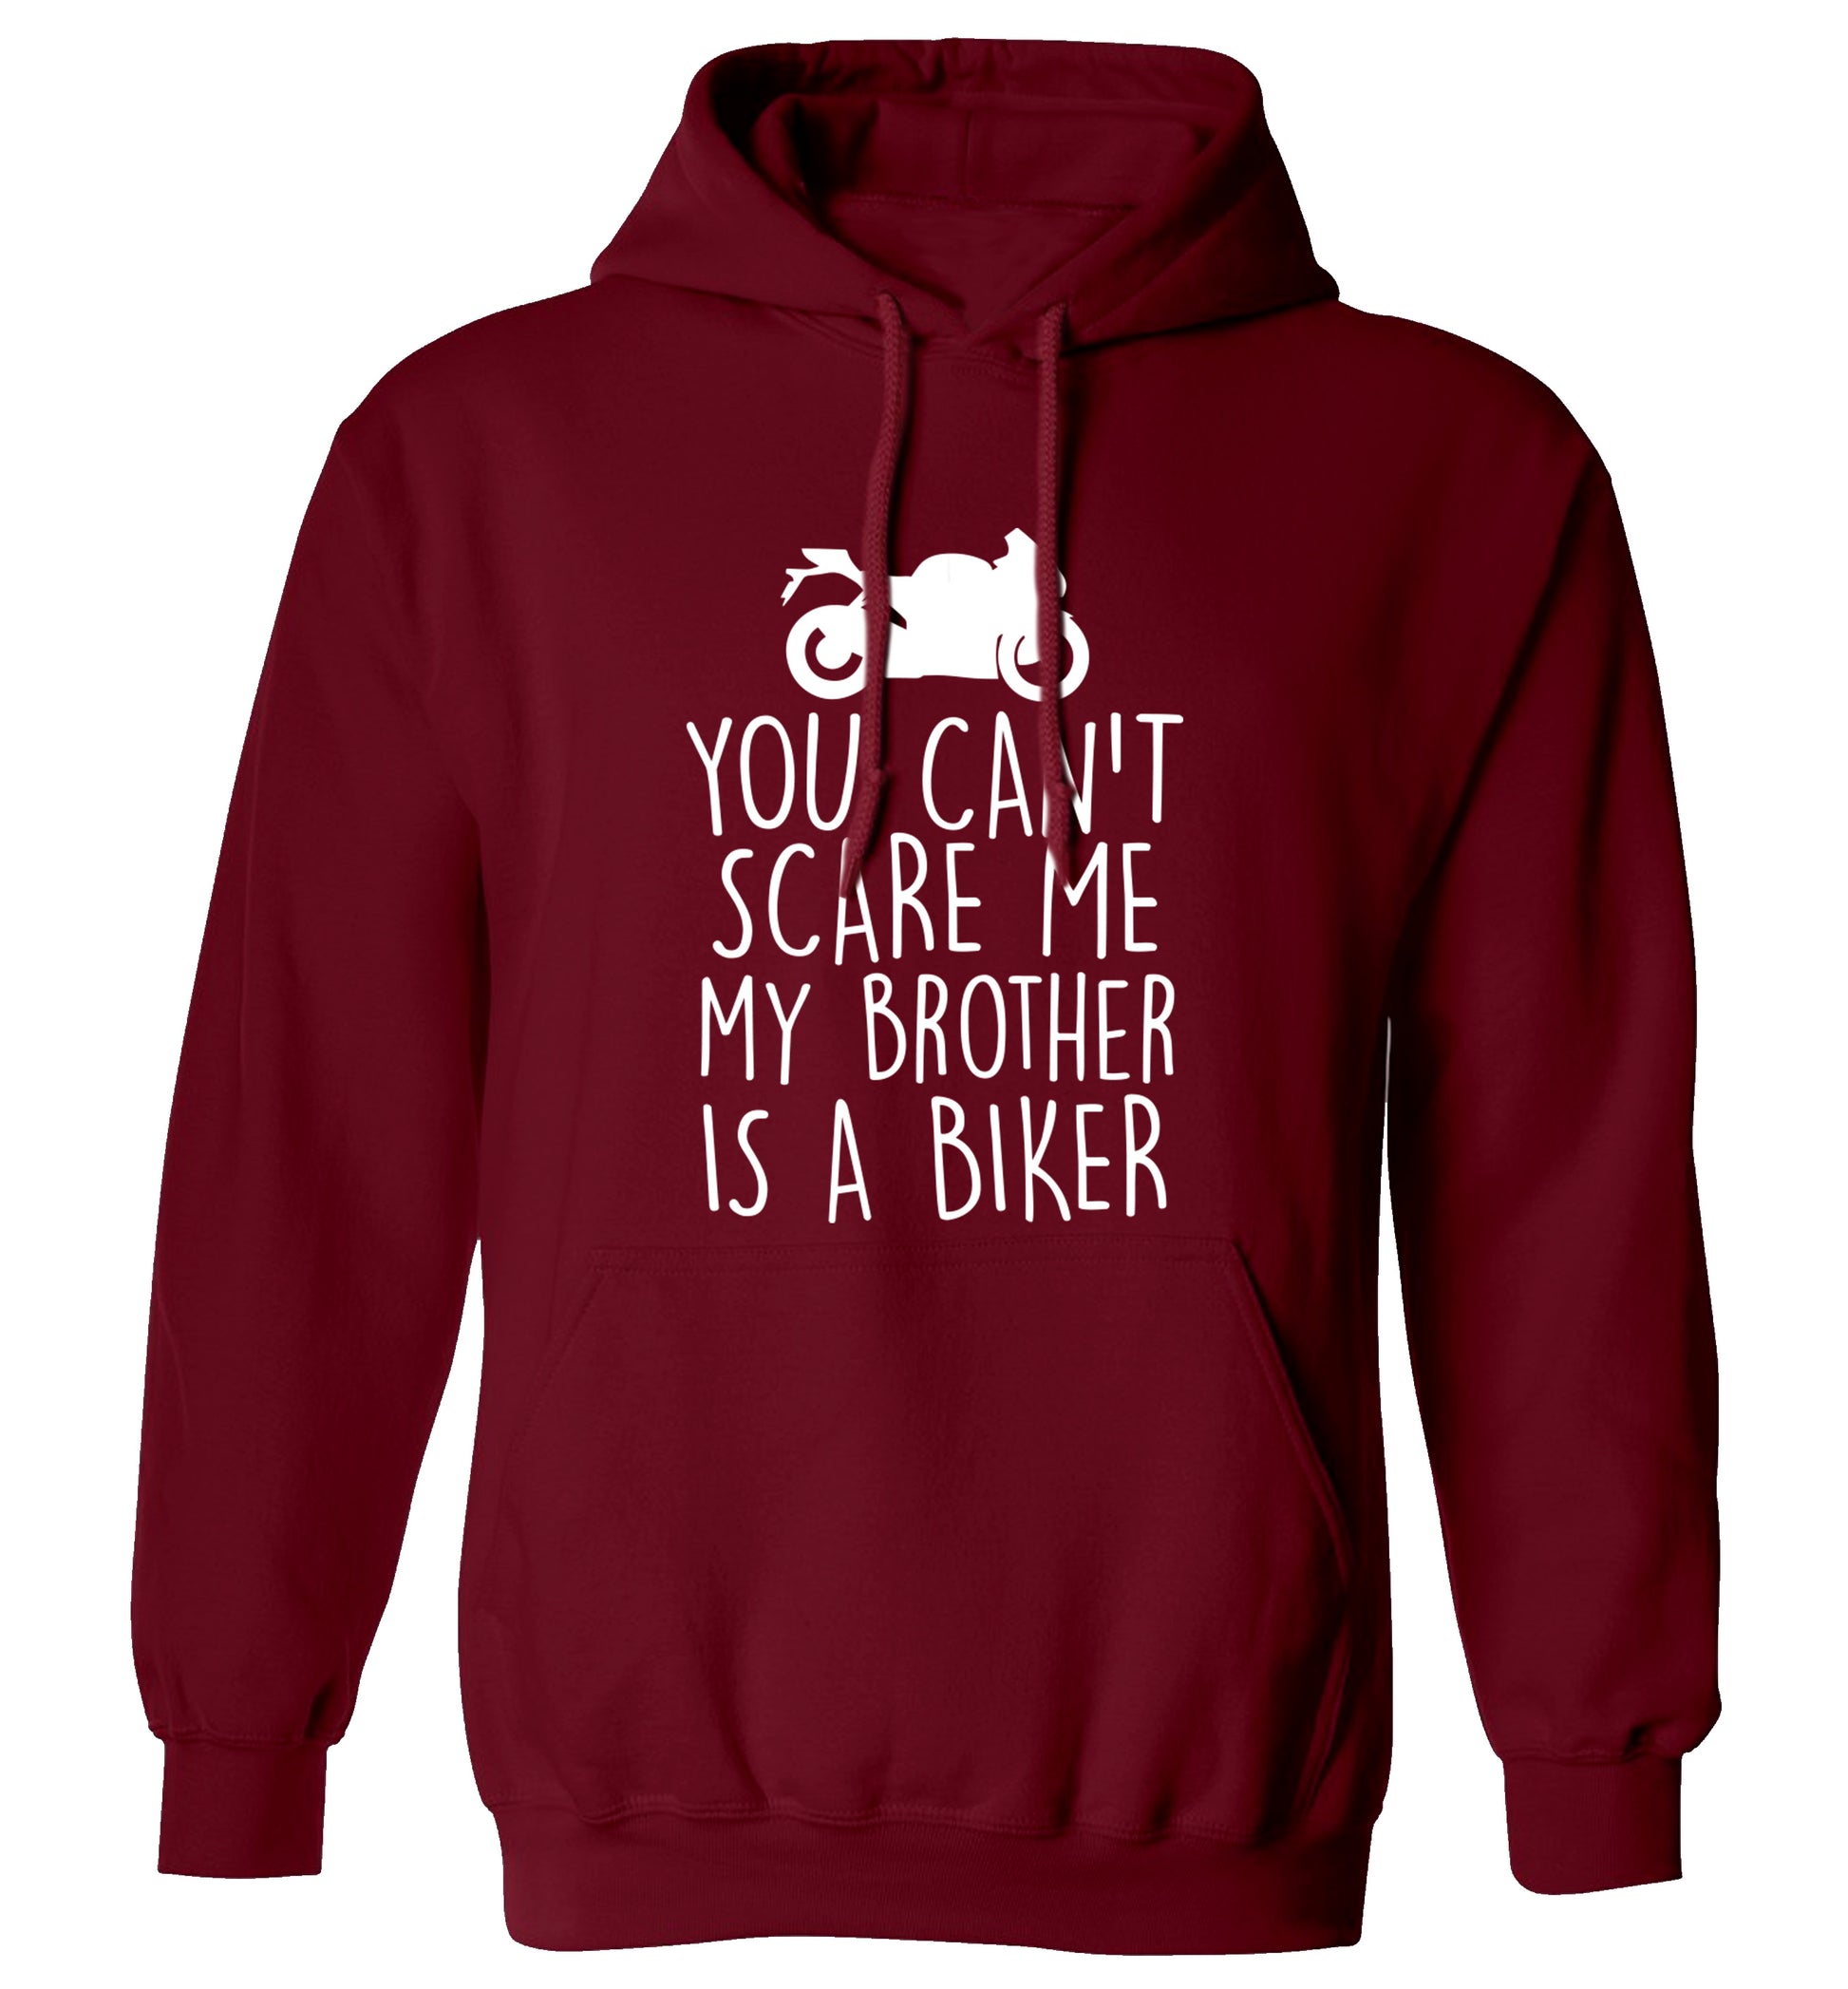 You can't scare me my brother is a biker adults unisex maroon hoodie 2XL